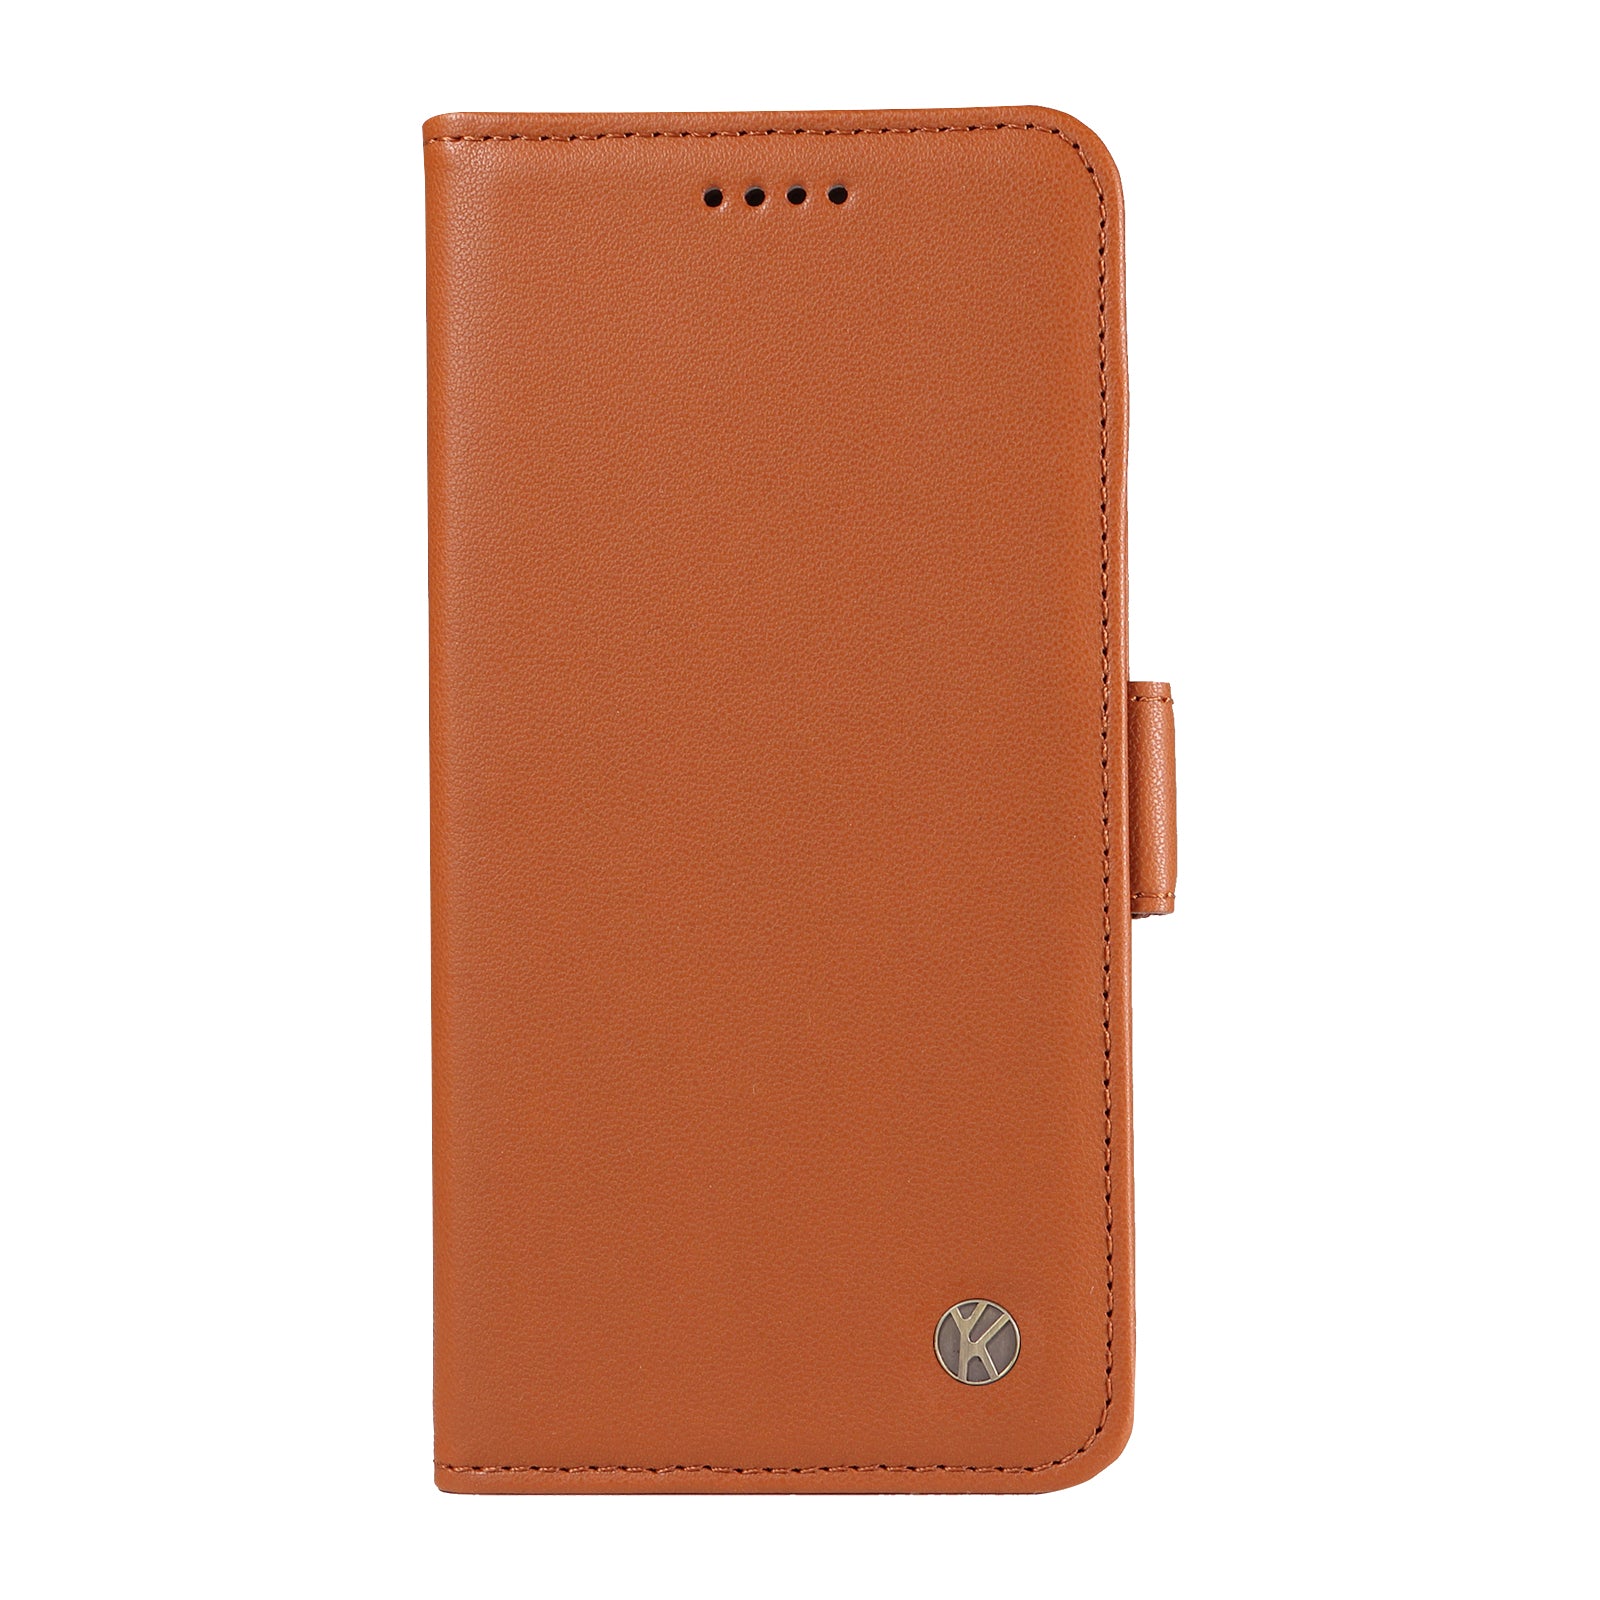 YIKATU YK-003 For Samsung Galaxy S24 Case PU Leather Folio Wallet Phone Cover - Brown